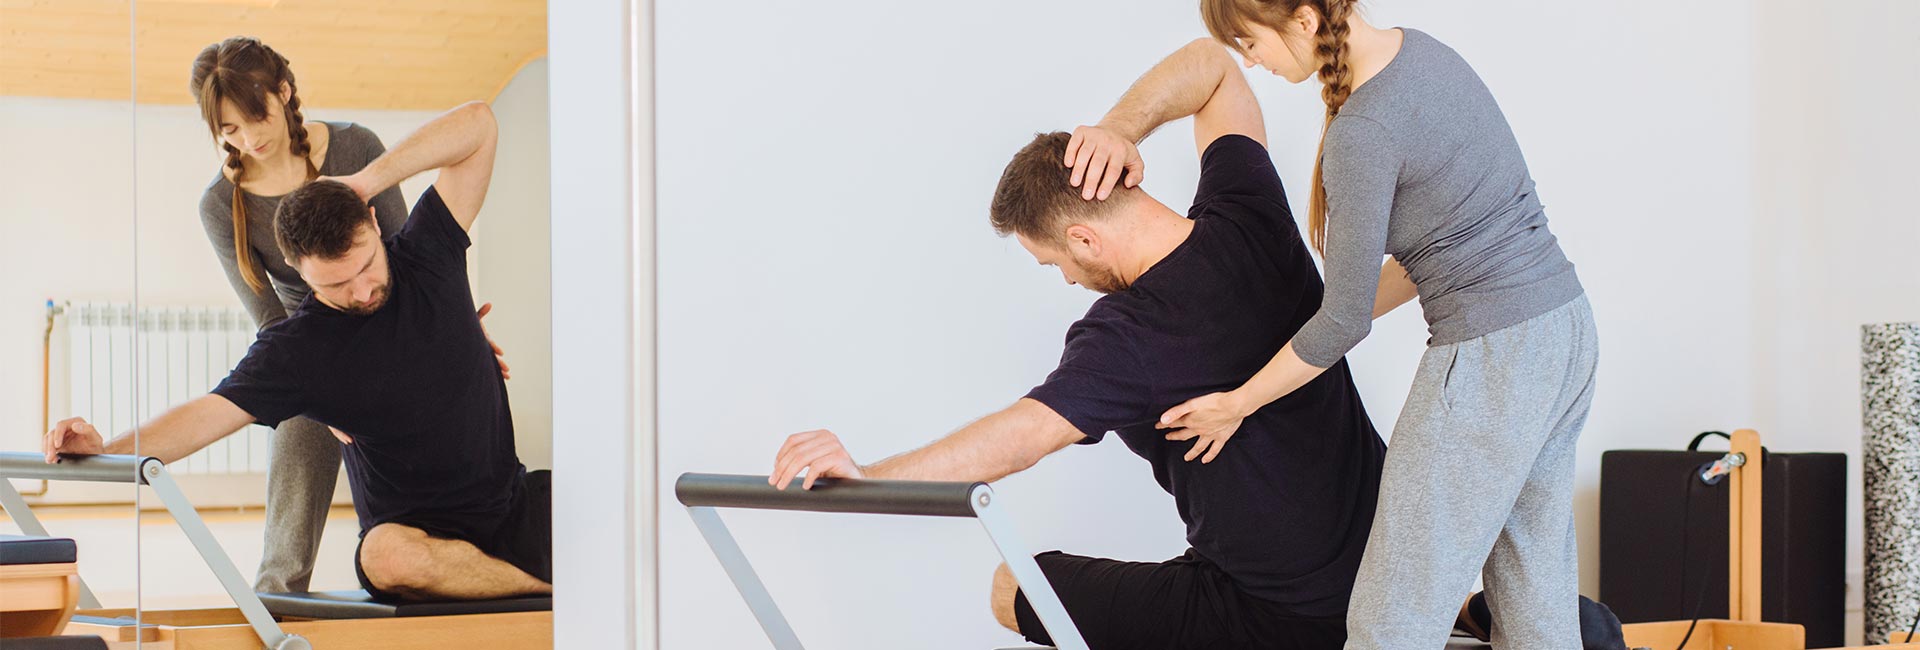 A physical therapist works with a patient on exercises for posture, neck pain and back pain.